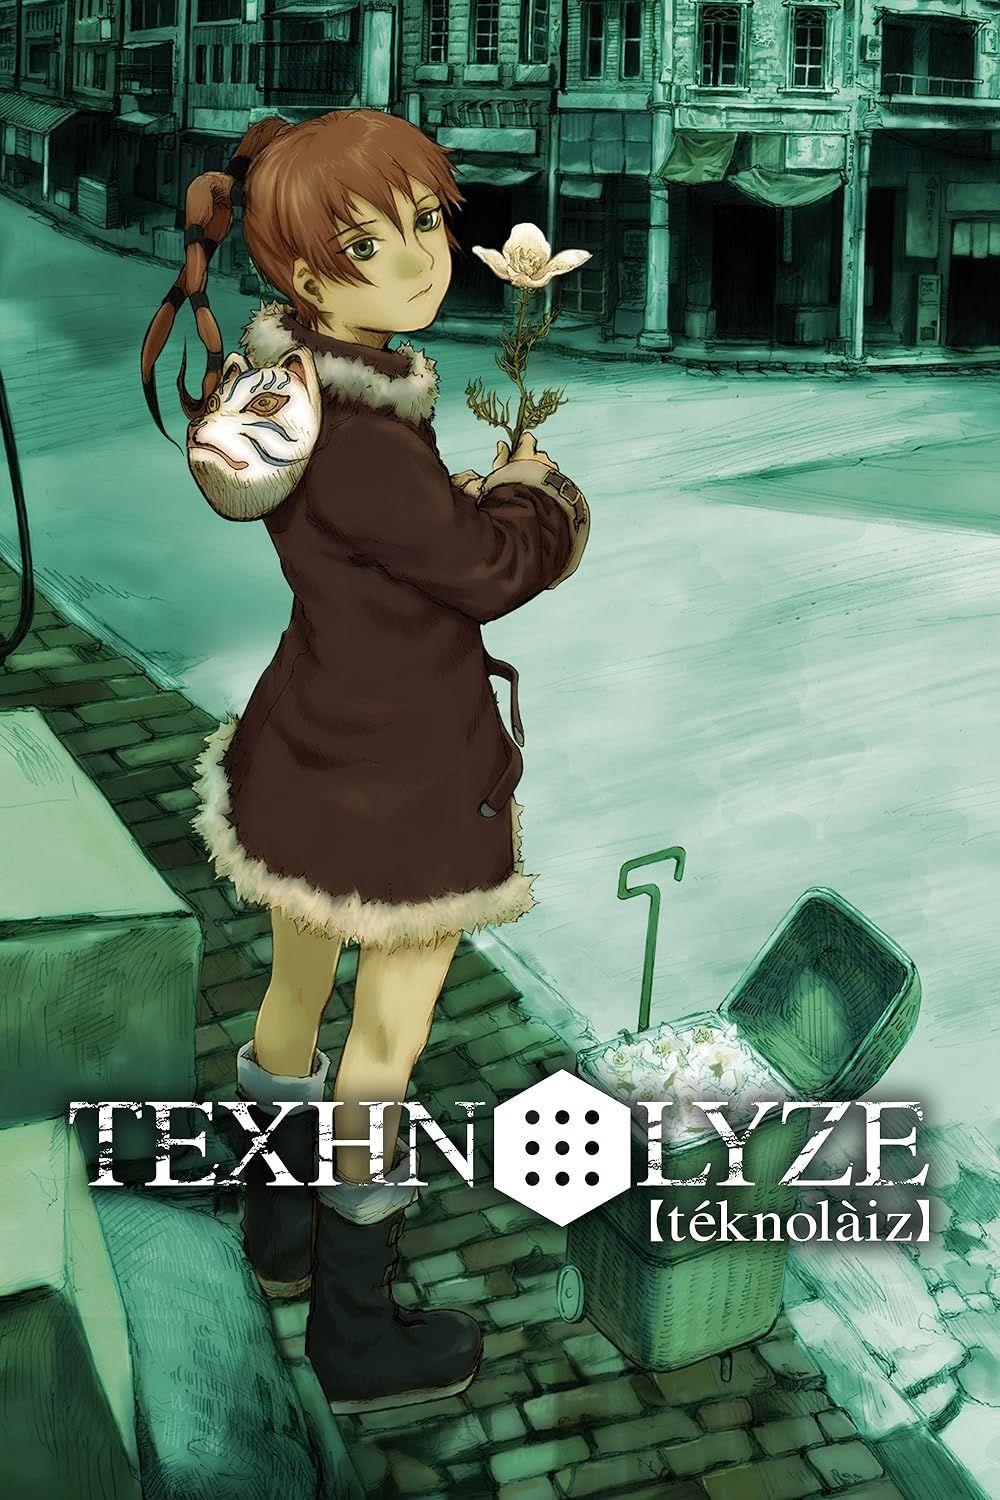 Ren holding a flower on the poster of Texhnolyze